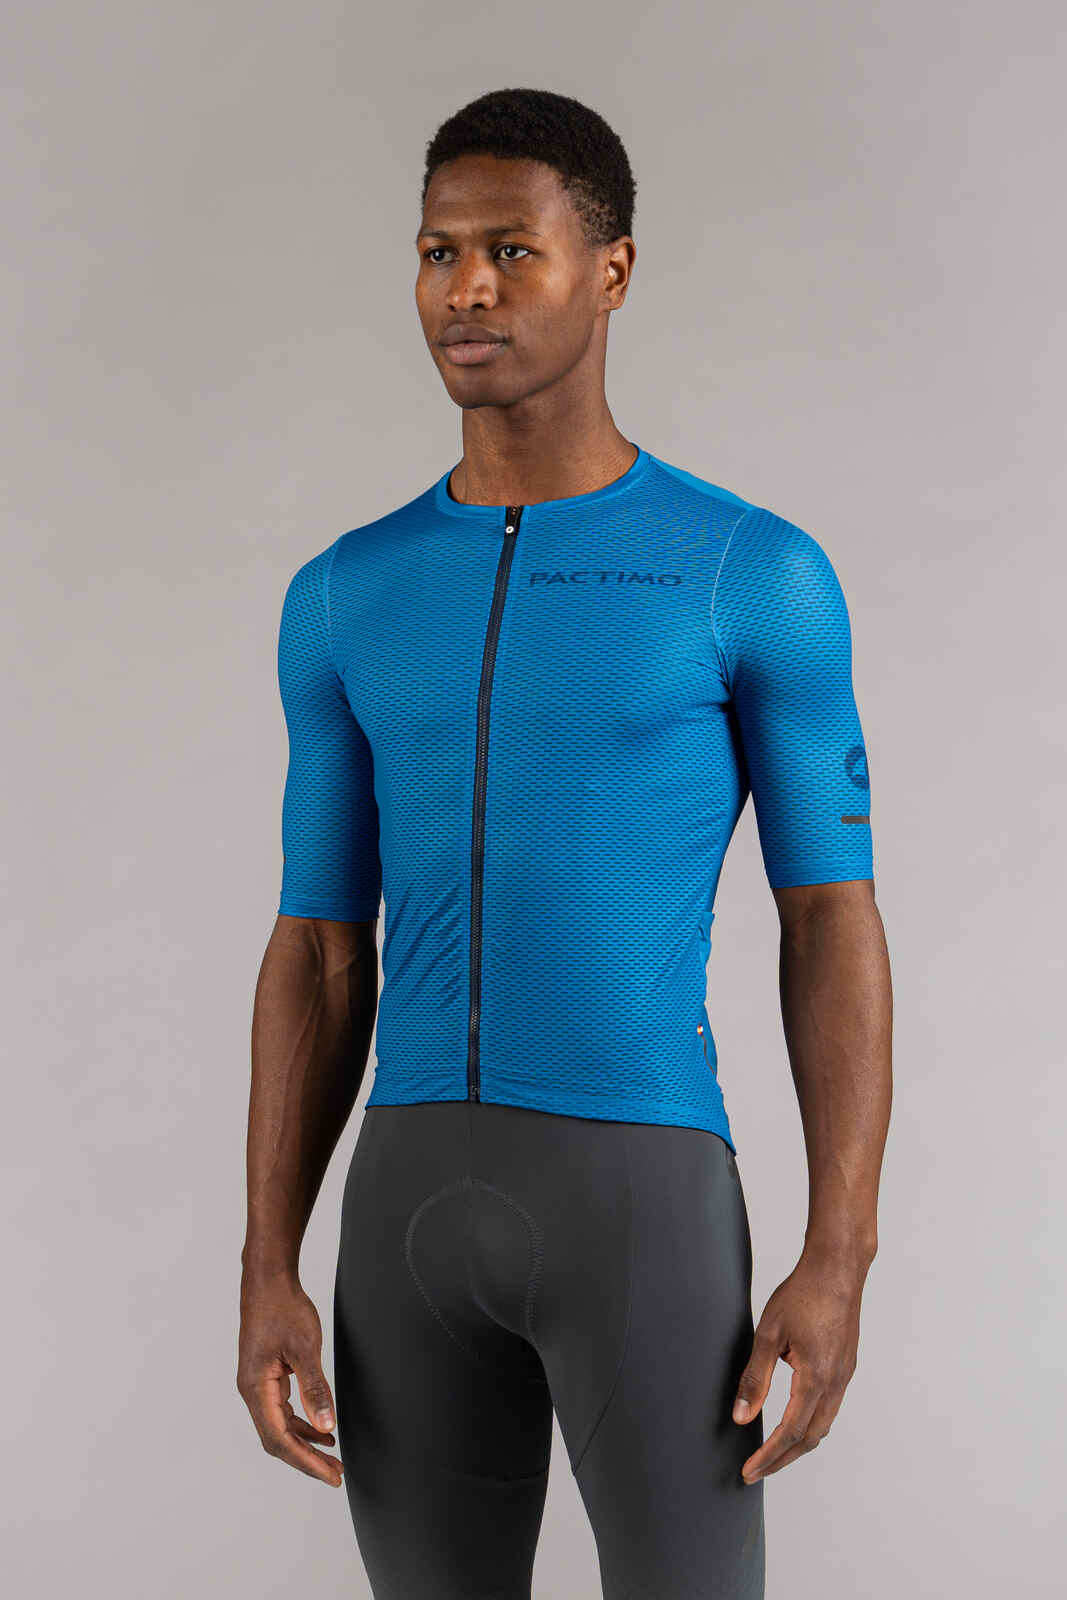 Men's Blue Mesh Cycling Jersey - Front View